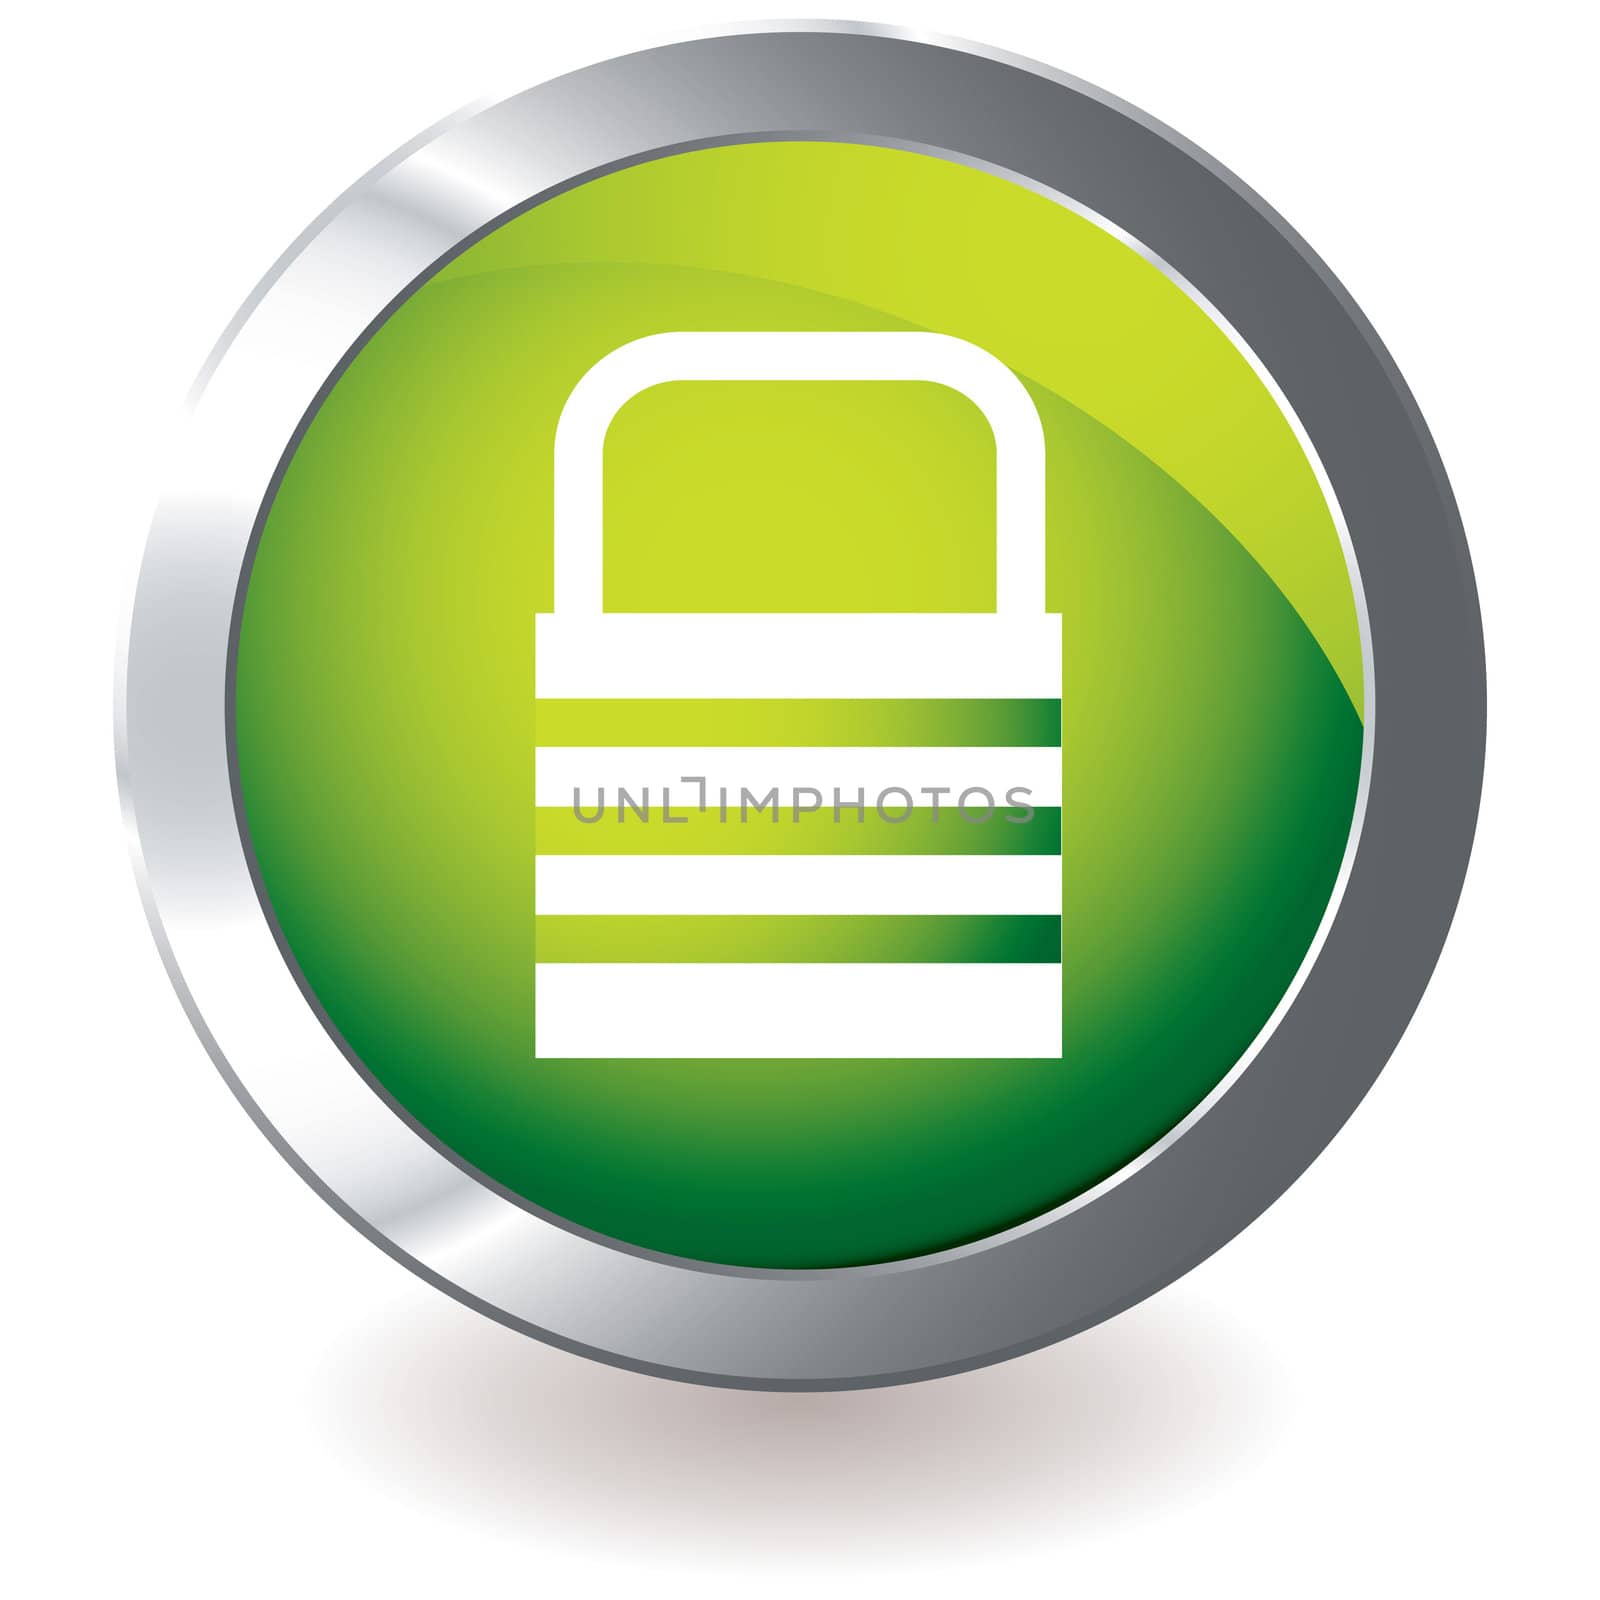 green modern icon with silver metal bevel and internet lock design